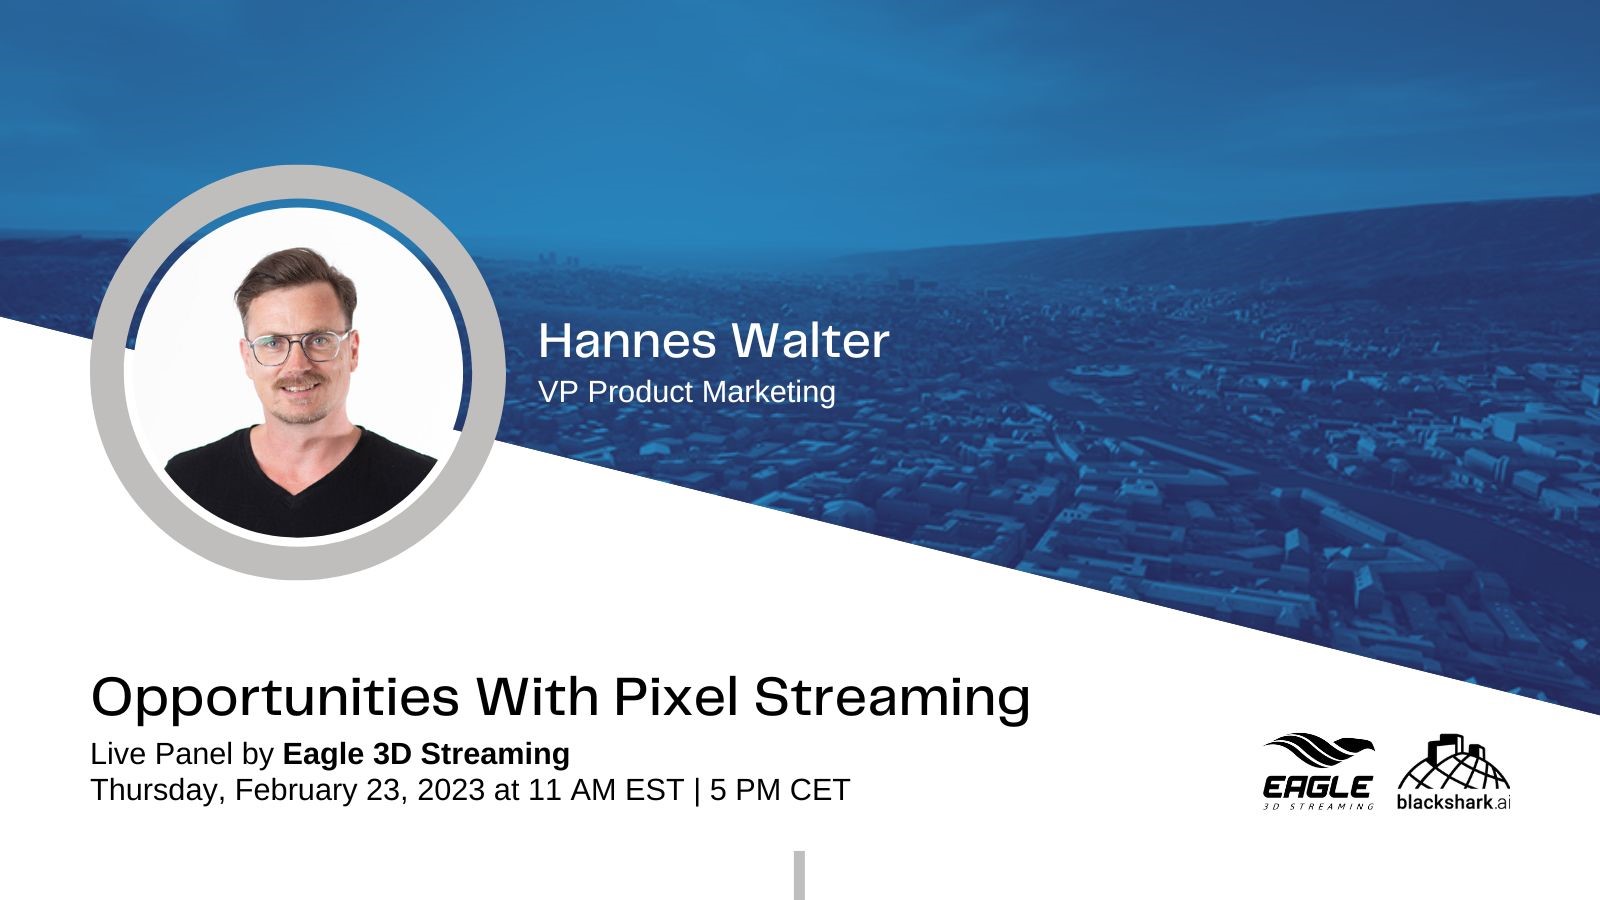 Eagle 3D Streaming’s "Opportunities With Pixel Streaming